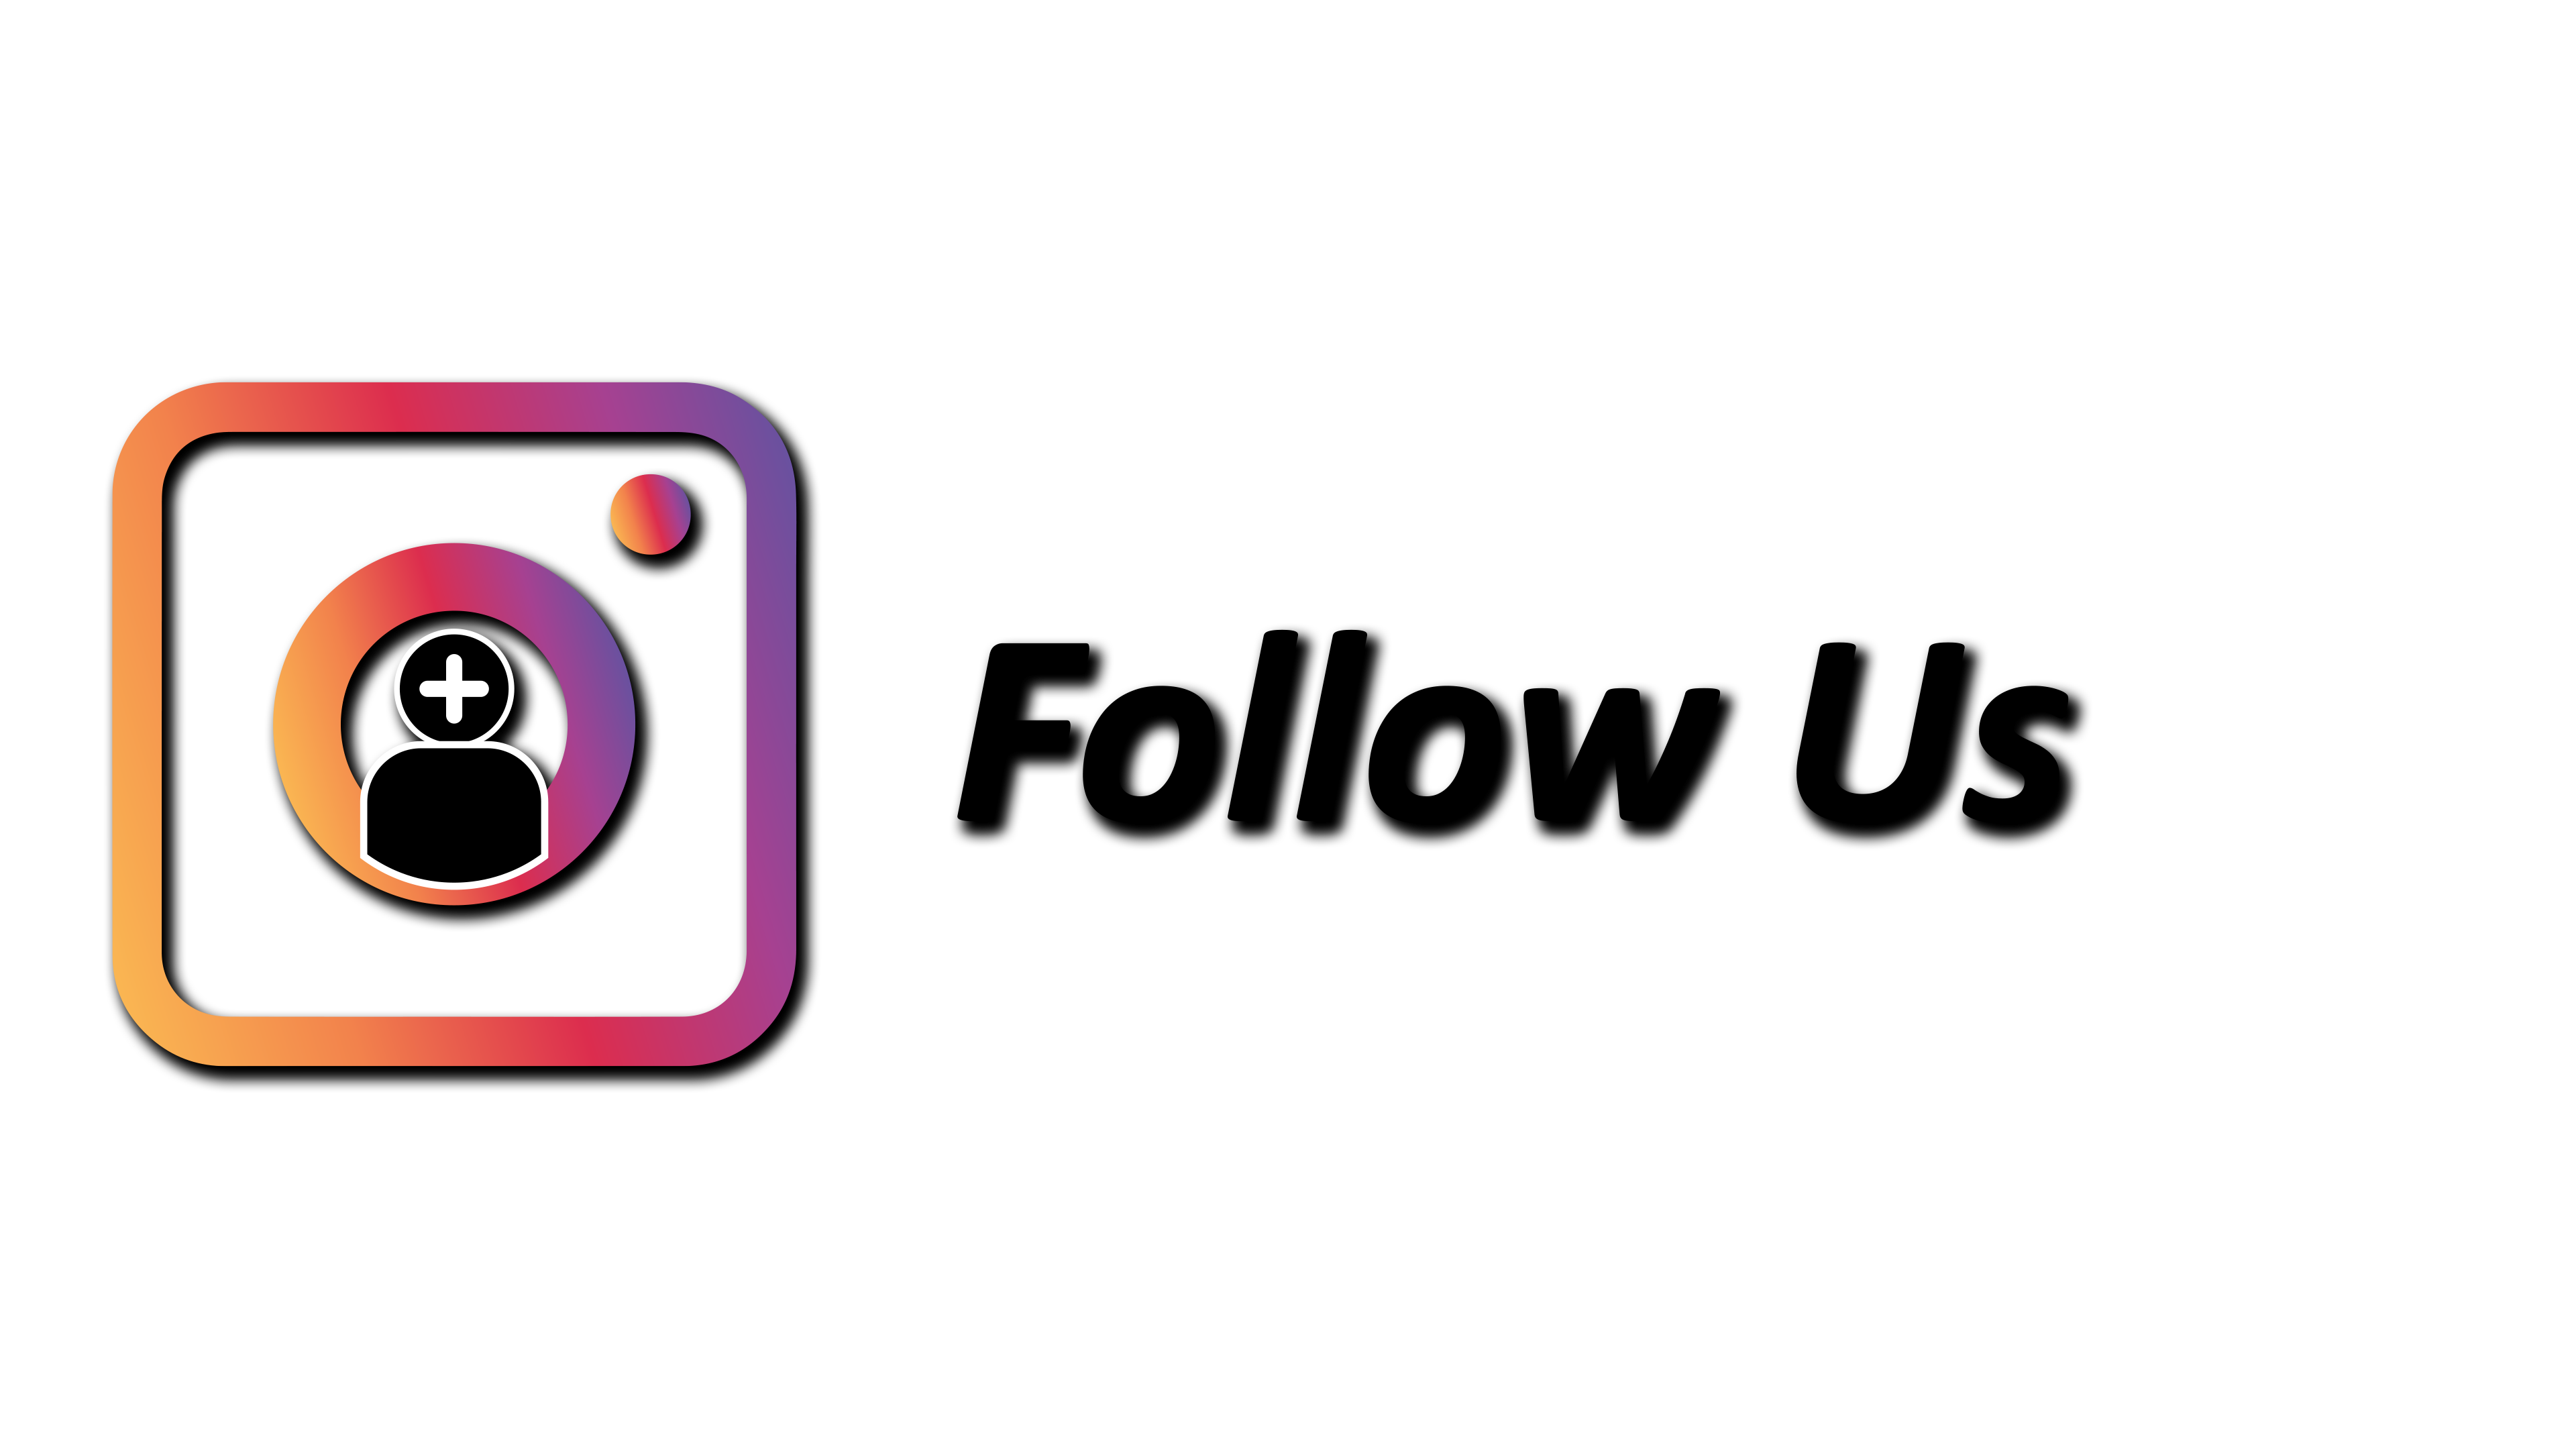 Download instagram logo icon isolated Free Vector | CorelDraw Design ( Download Free CDR, Vector, Stock Images, Tutorials, Tips & Tricks)